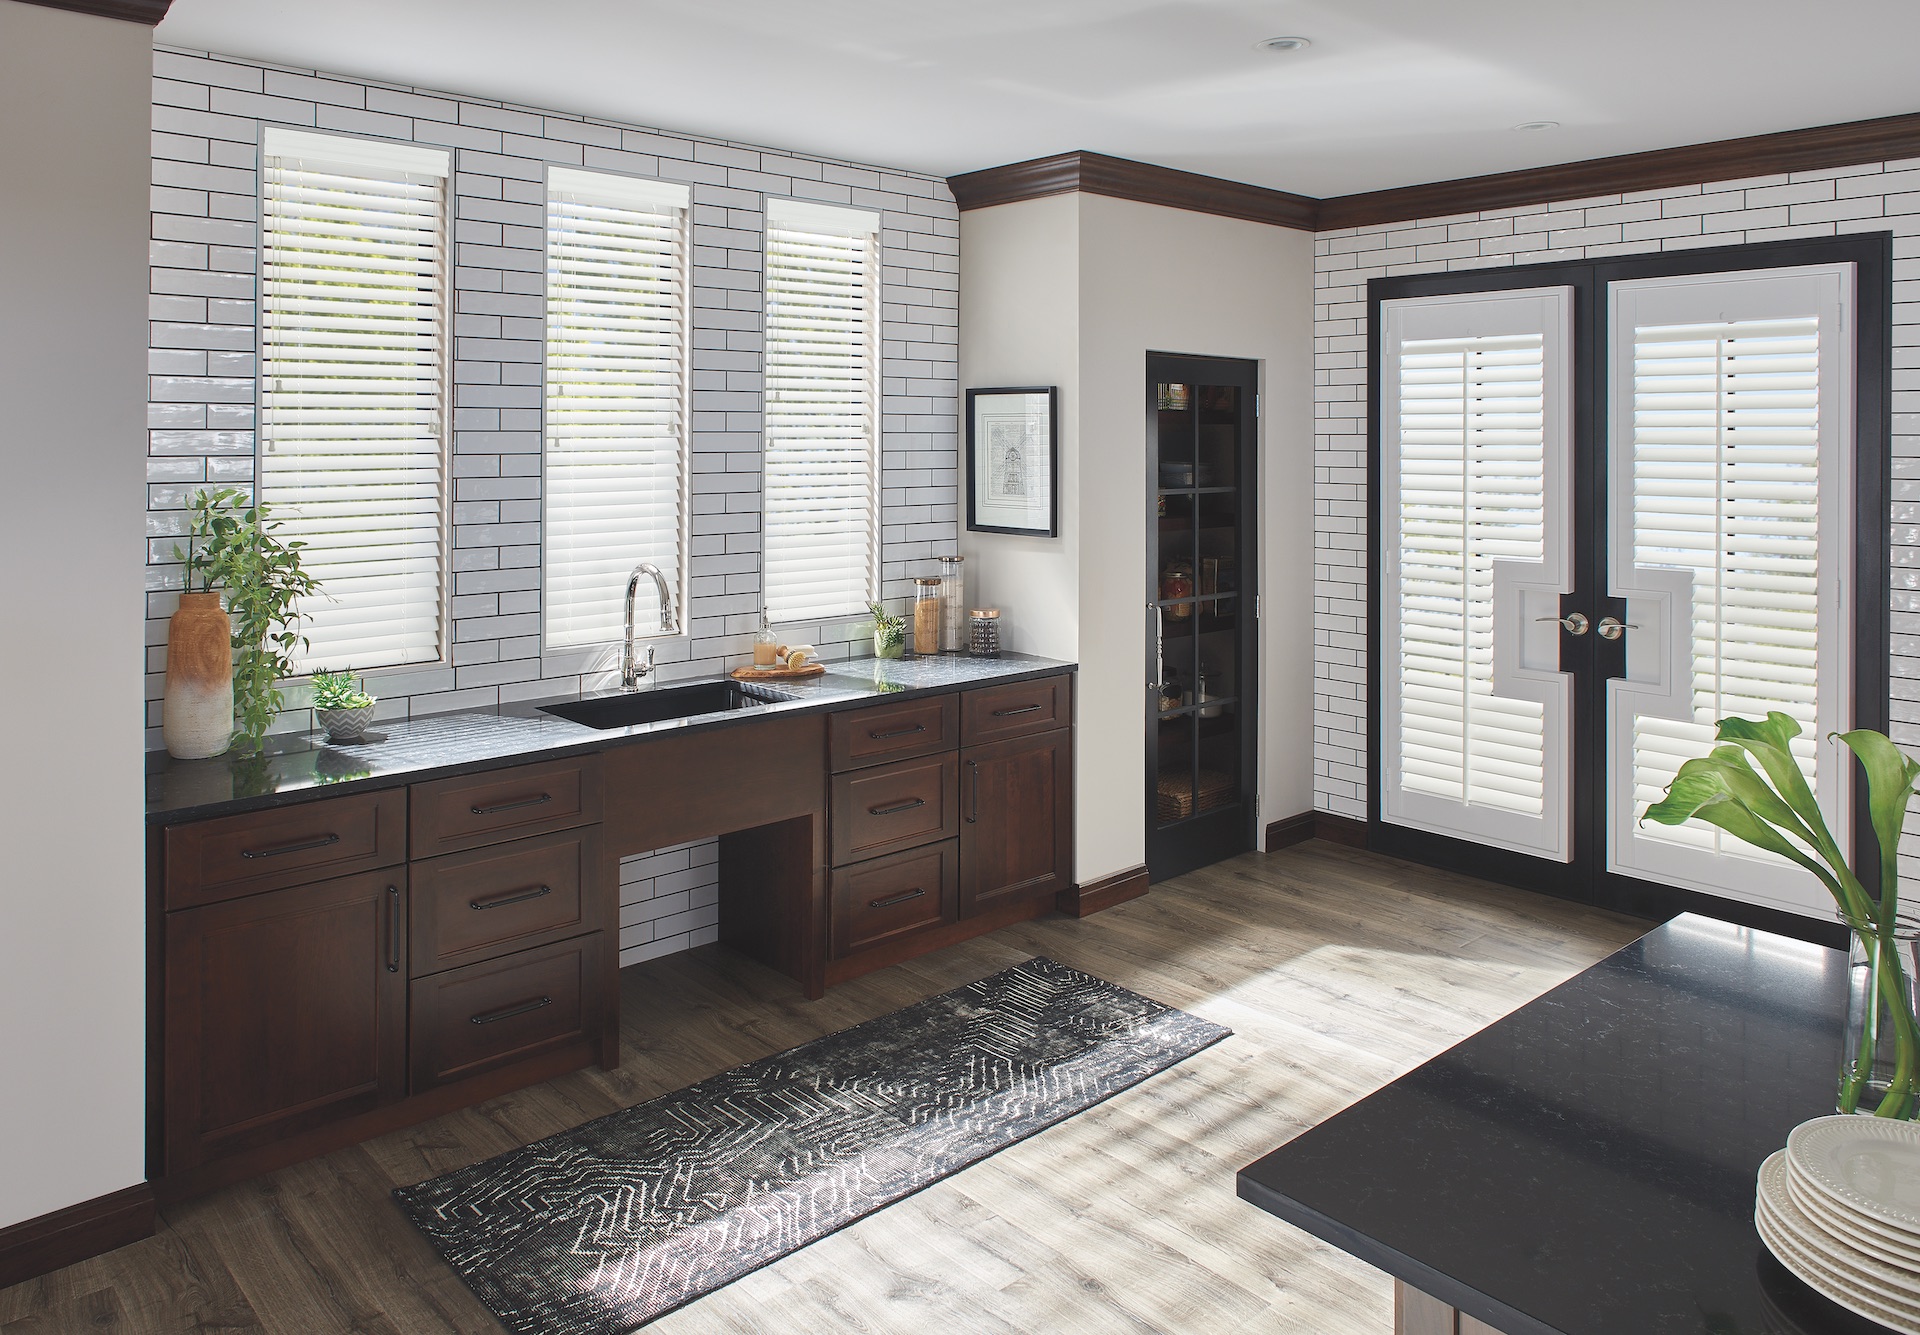 Custom Blinds - Graber wood blinds and faux wood blinds - exterior, motorized window treatments in Nashville | Dynamic Delivery Blinds